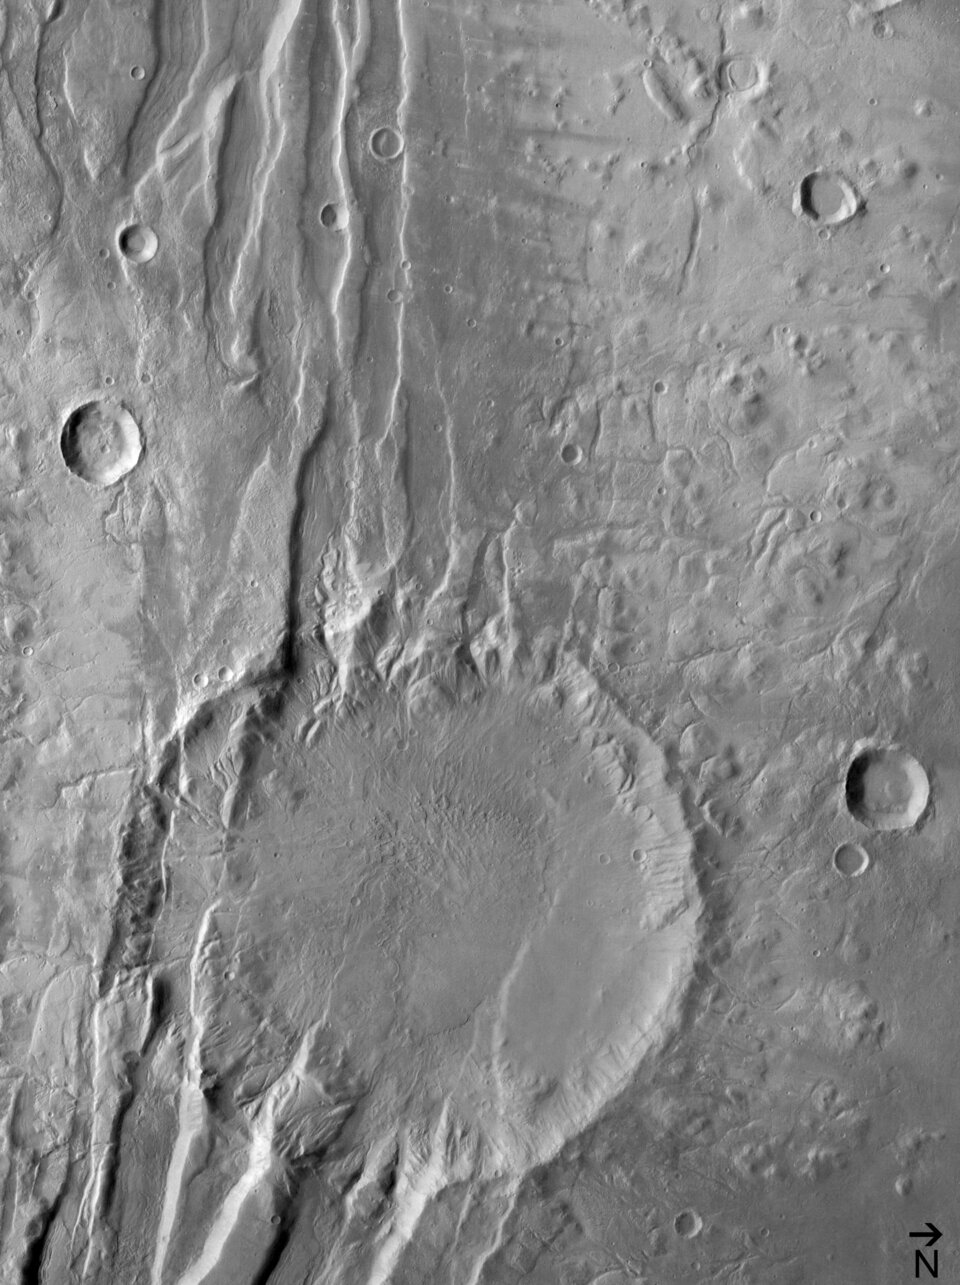 (5) Disrupted crater at Acheron Fossae in black/white